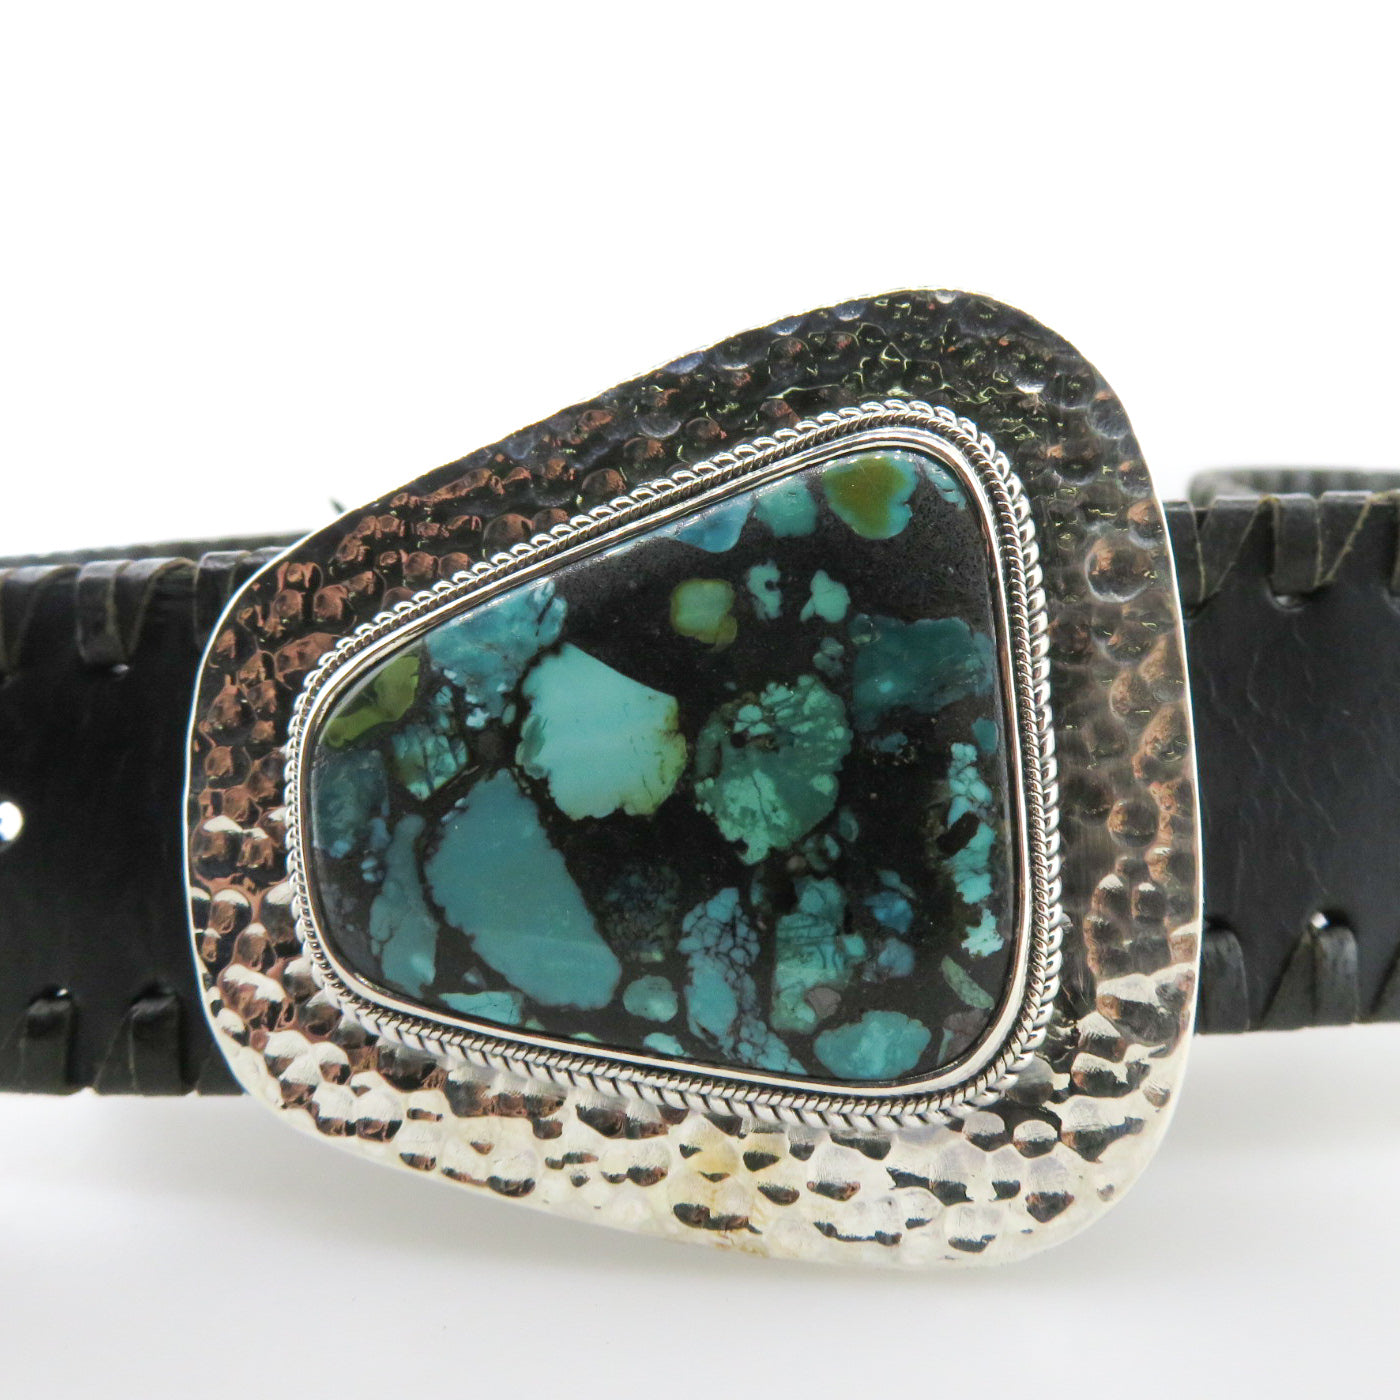 Sterling Silver Buckle with Turquoise